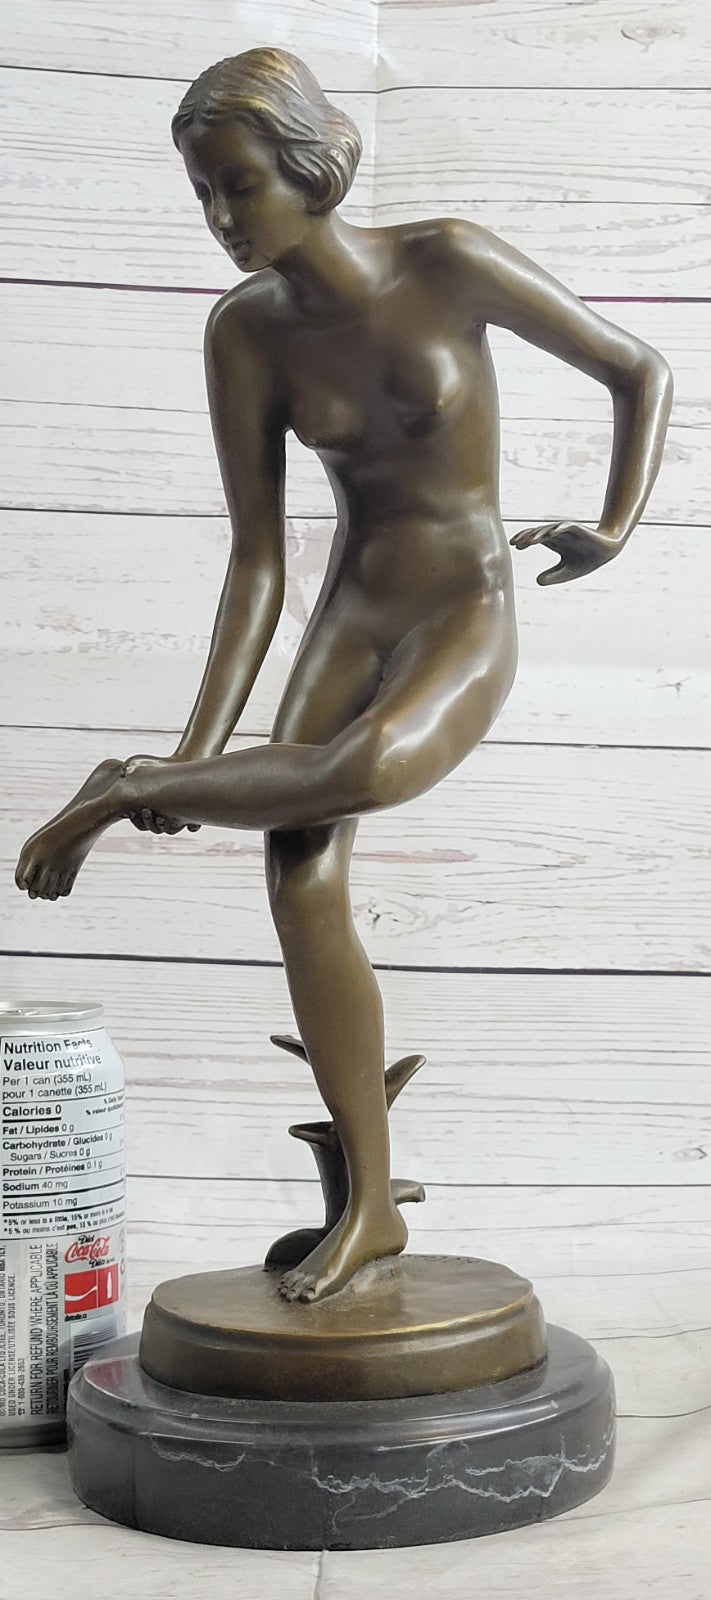 Nude Lady Woman Girl Real Bronze Statue Sculpture for garden pool pond lake Gift